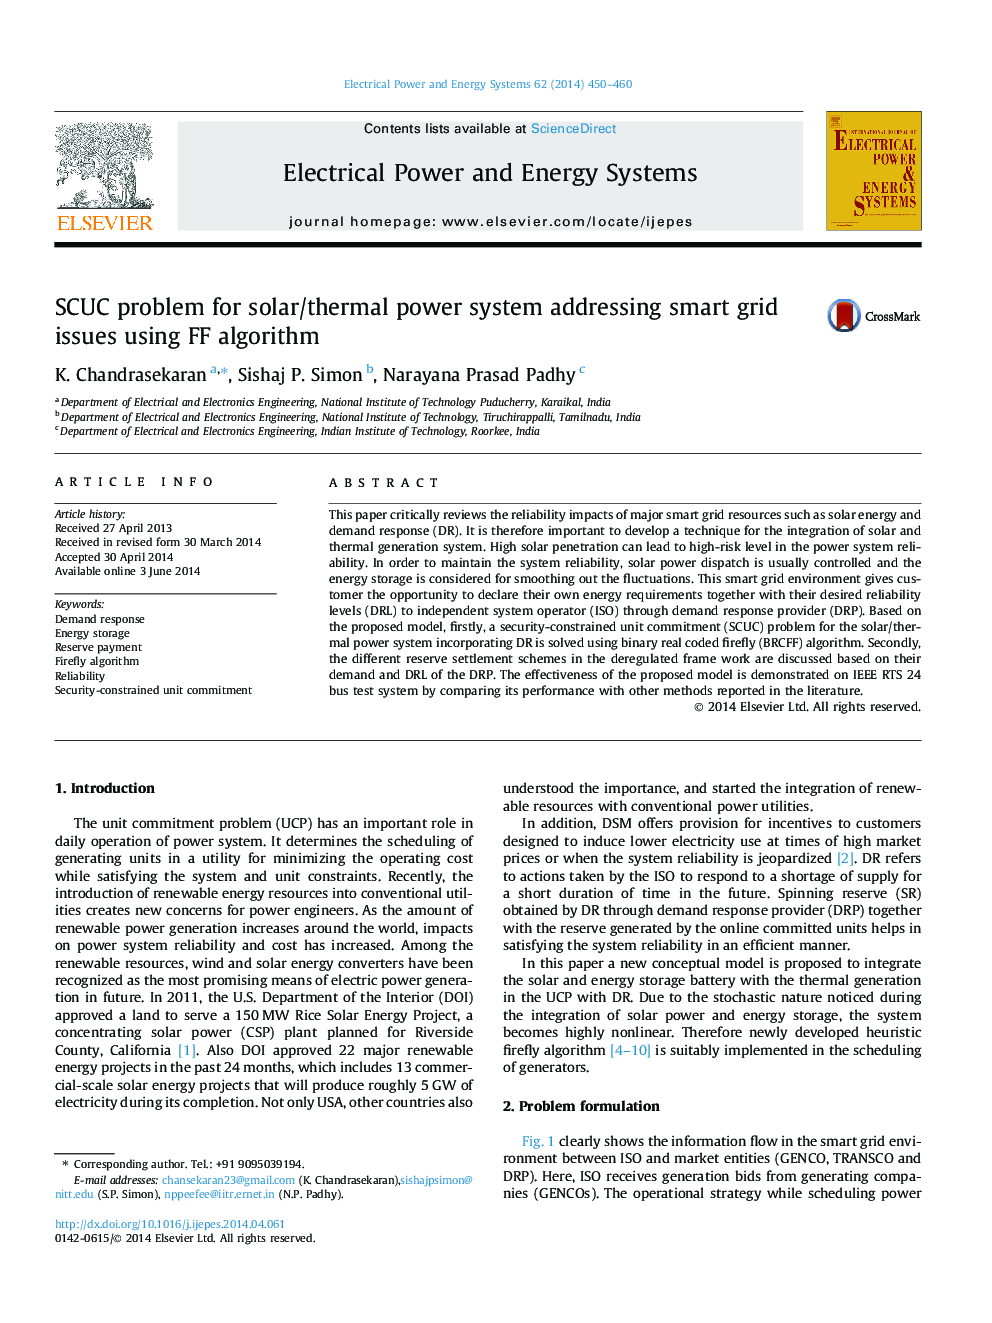 SCUC problem for solar/thermal power system addressing smart grid issues using FF algorithm